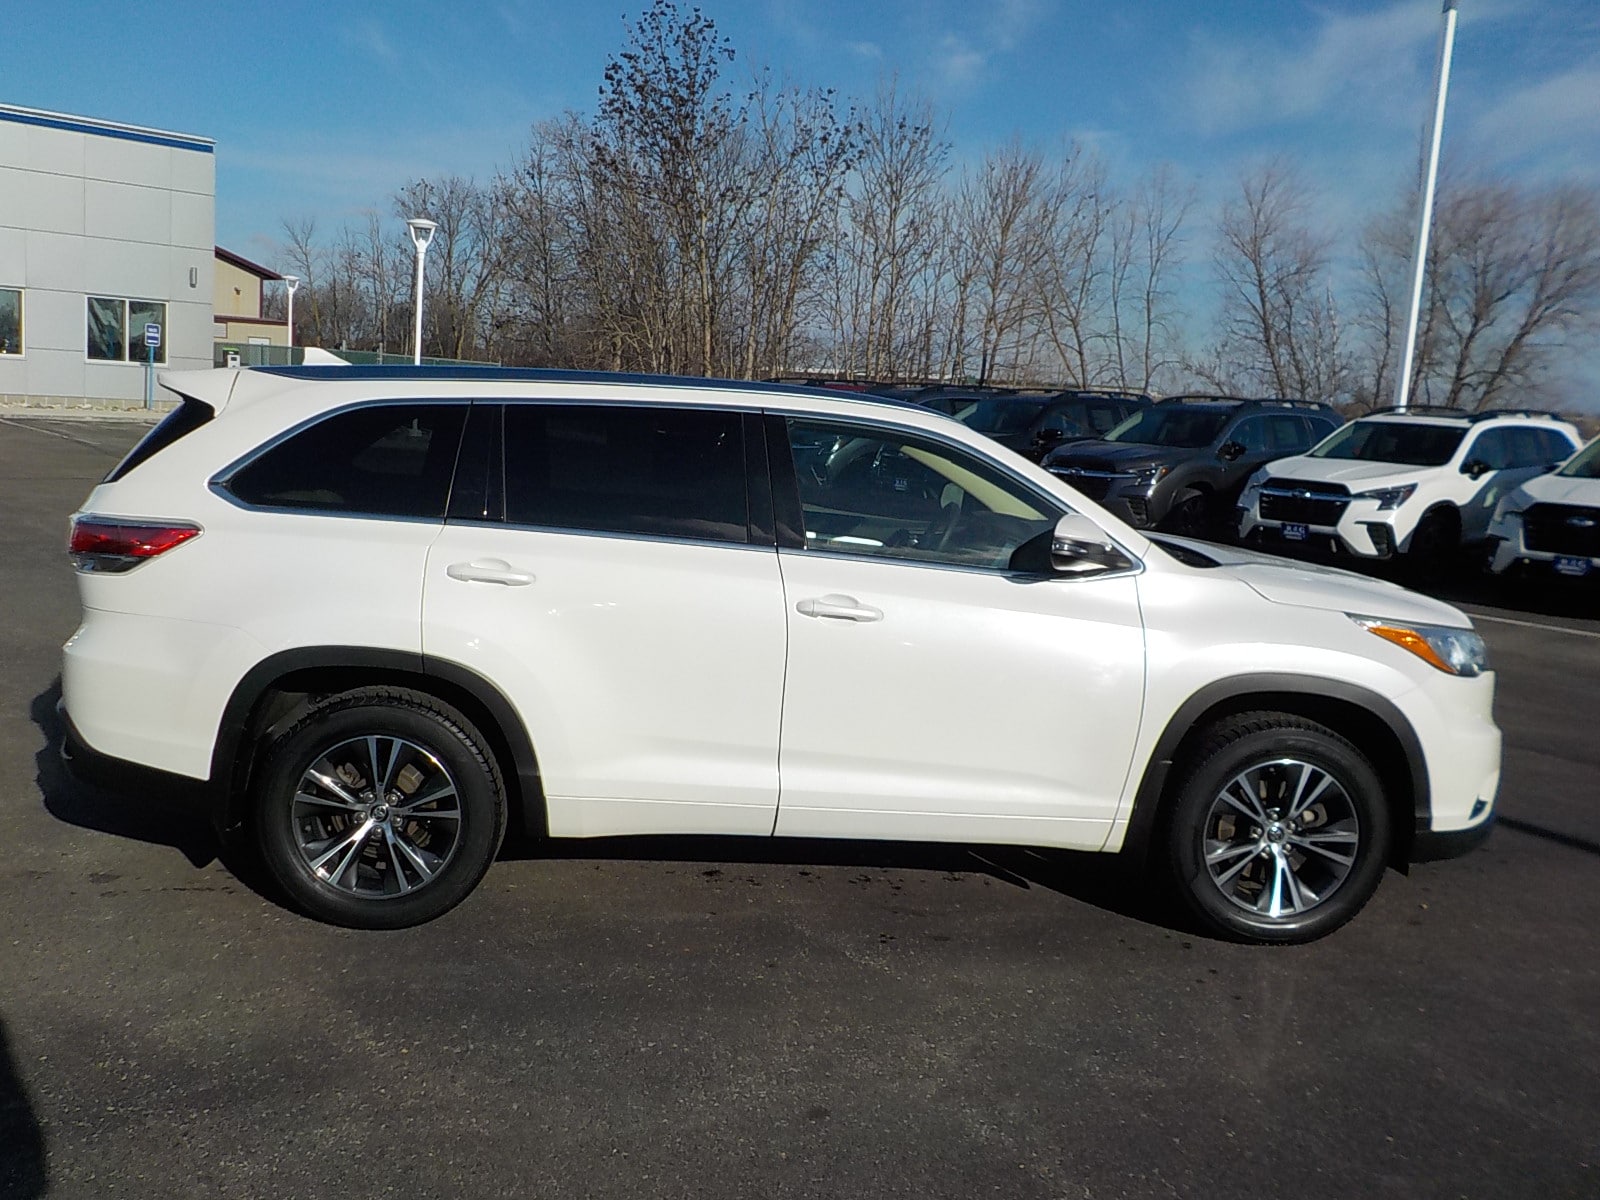 Used 2016 Toyota Highlander XLE with VIN 5TDJKRFH9GS247556 for sale in Detroit Lakes, Minnesota